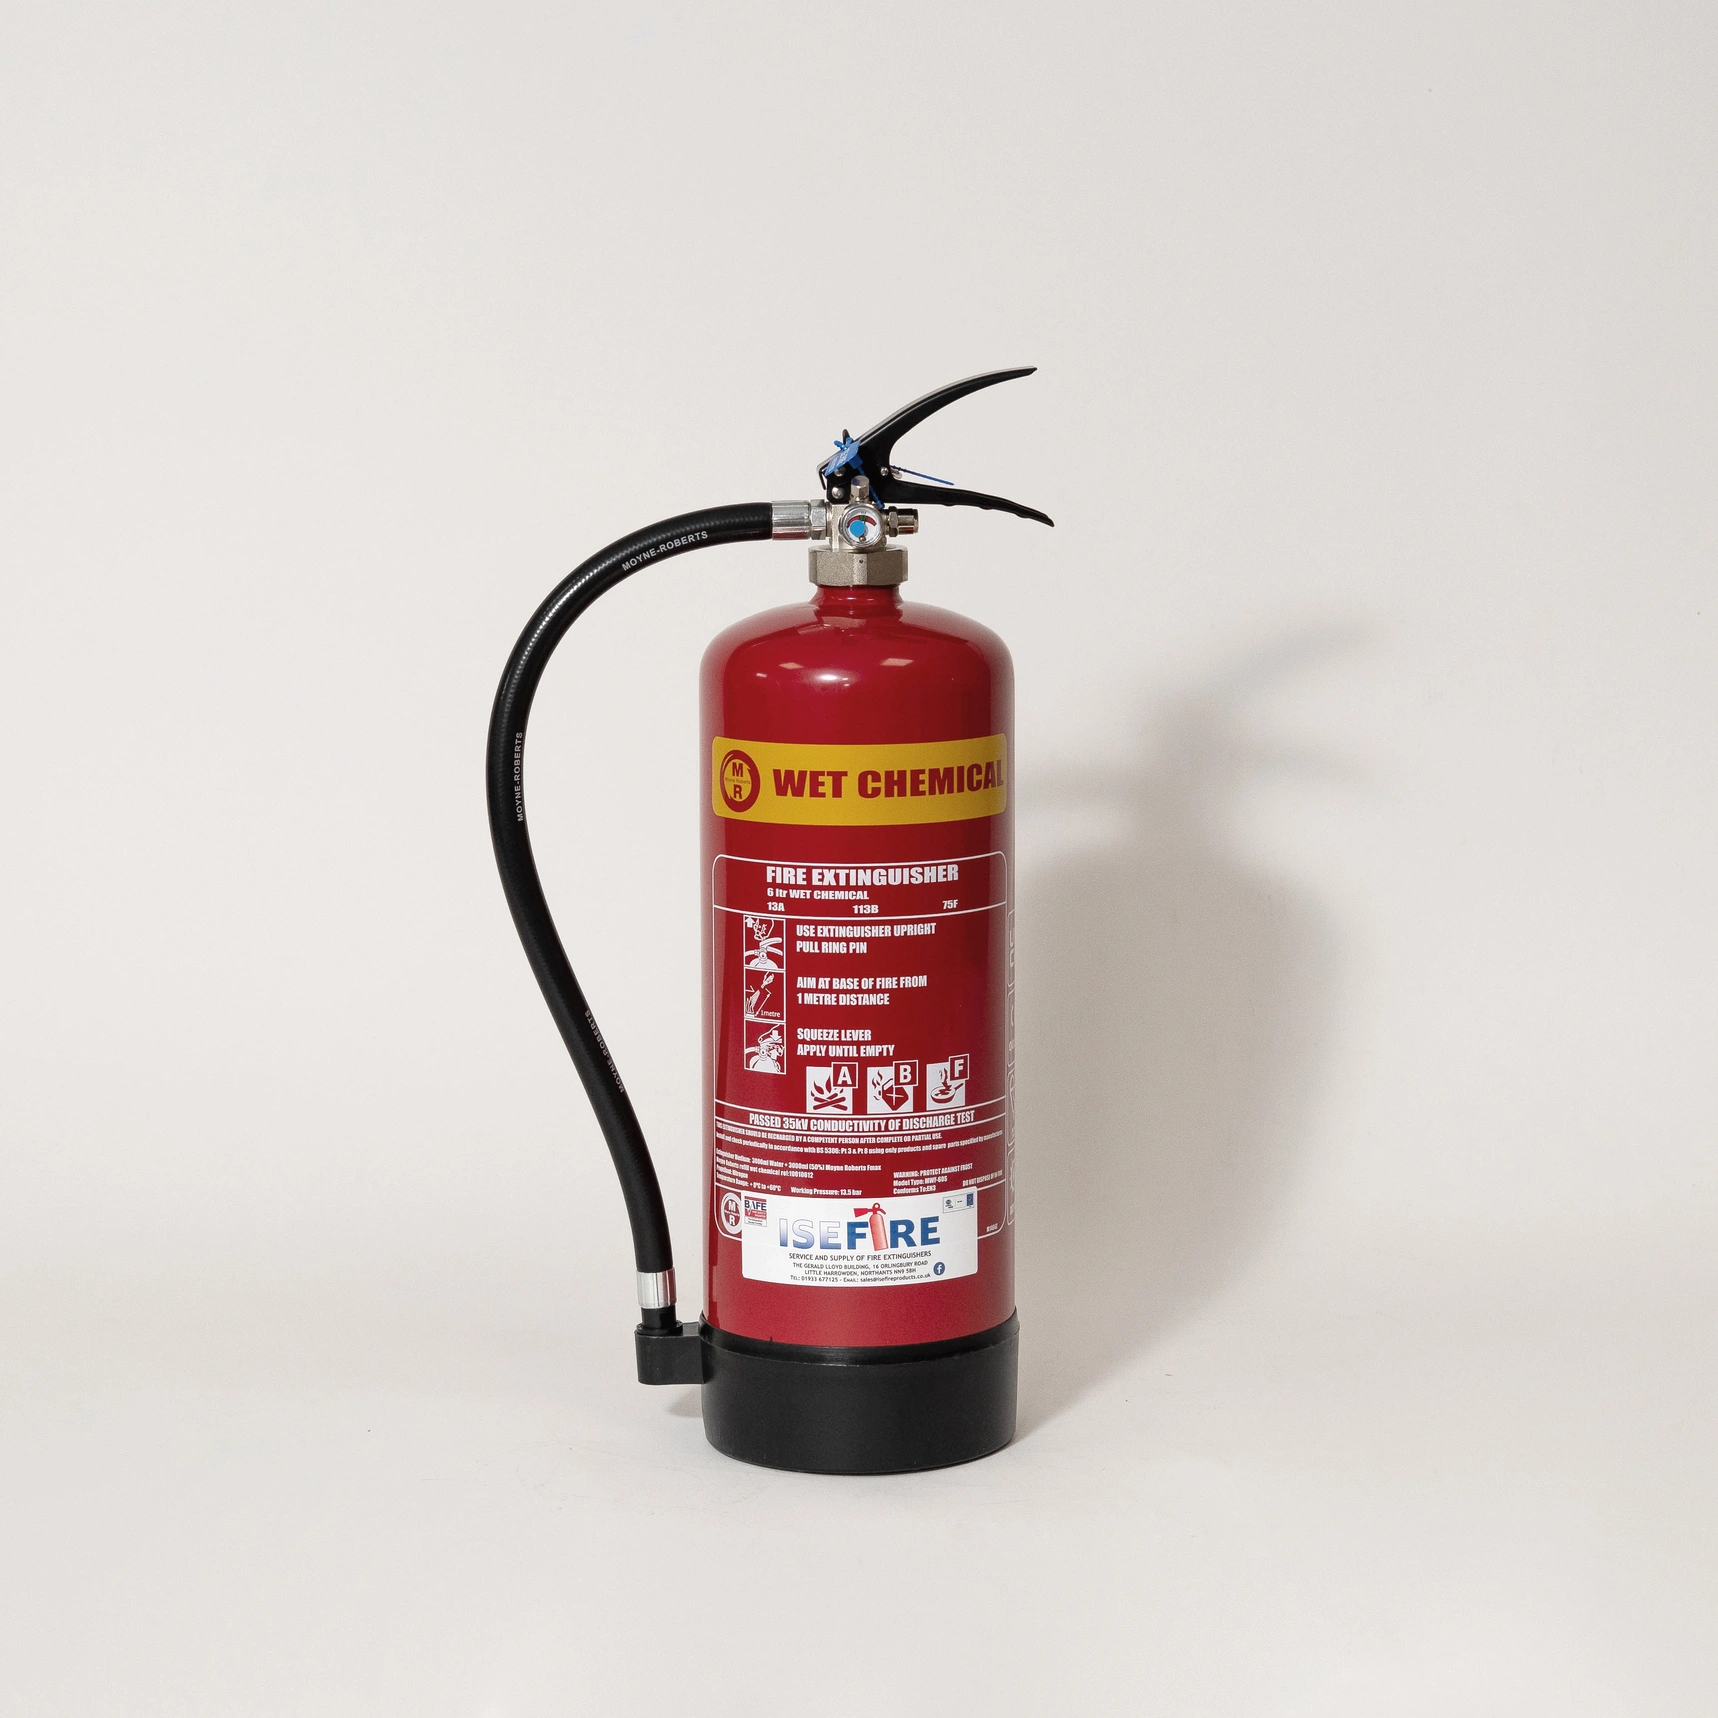 Wet chemical - yellow fire extinguisher for oils and fats.